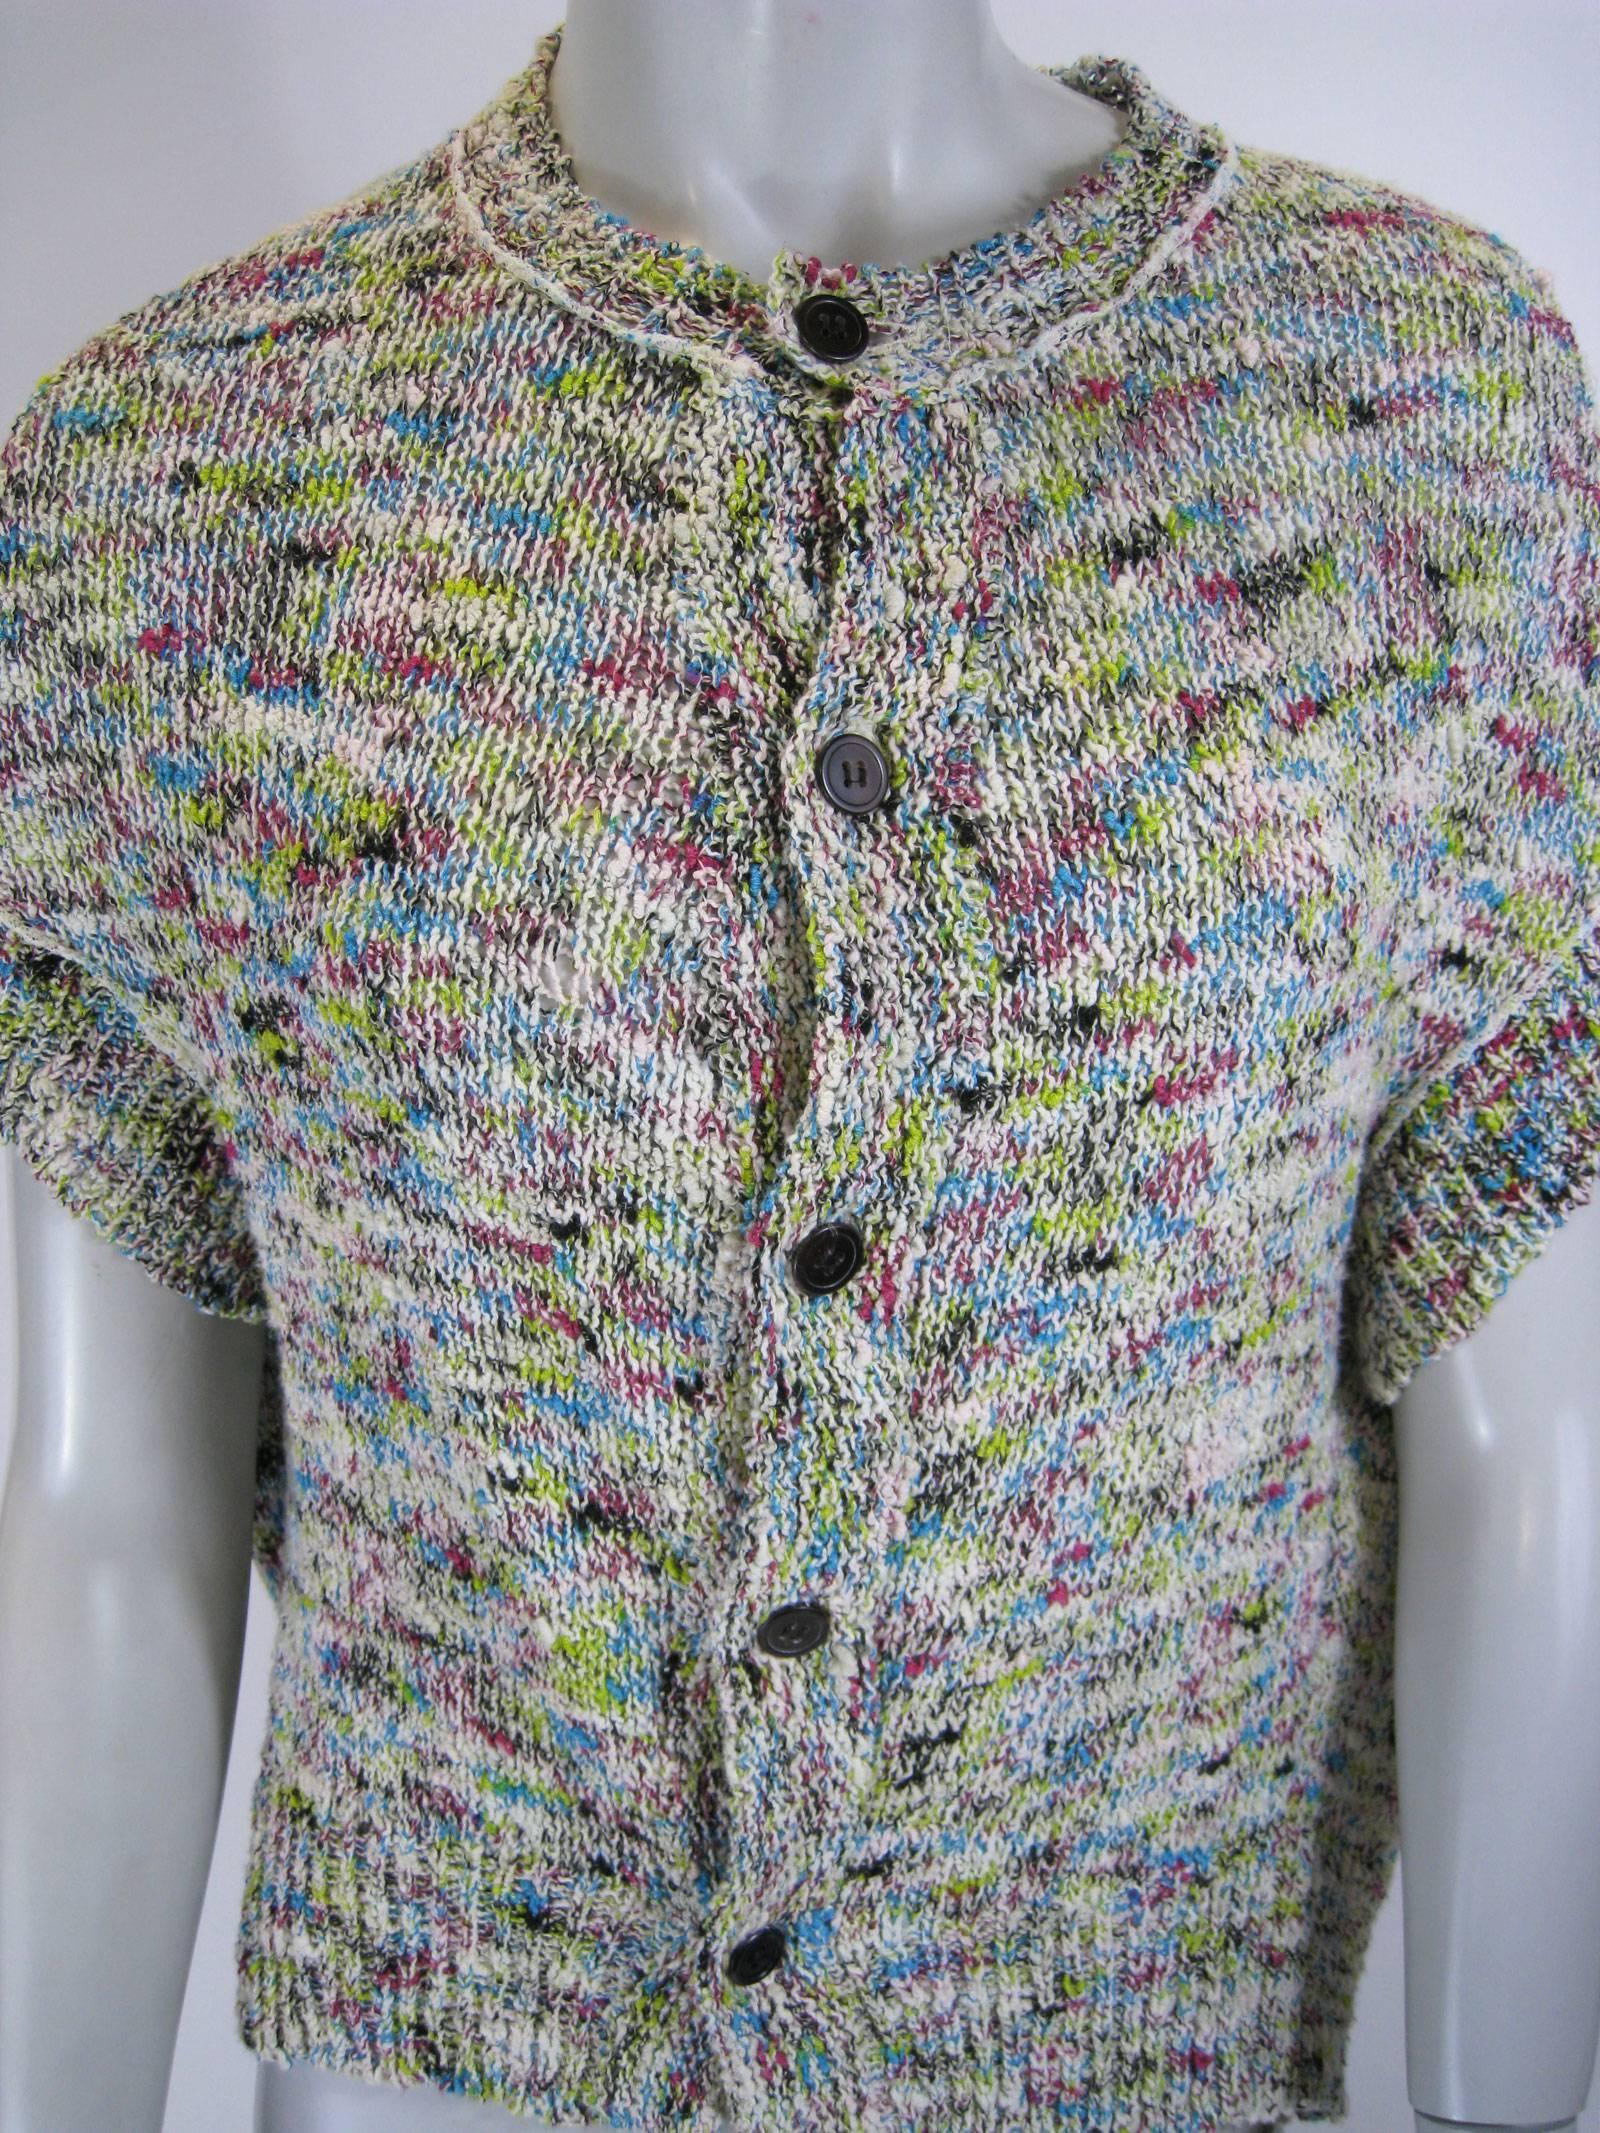 Colorful Y's cardigan.
Marled knit.
Cacoon shape.
Draped back that's slightly longer.
Ribbed knit neck, cuff and hem.
5 button closure.
Tagged a size 2 (Japan).

Bust: 40